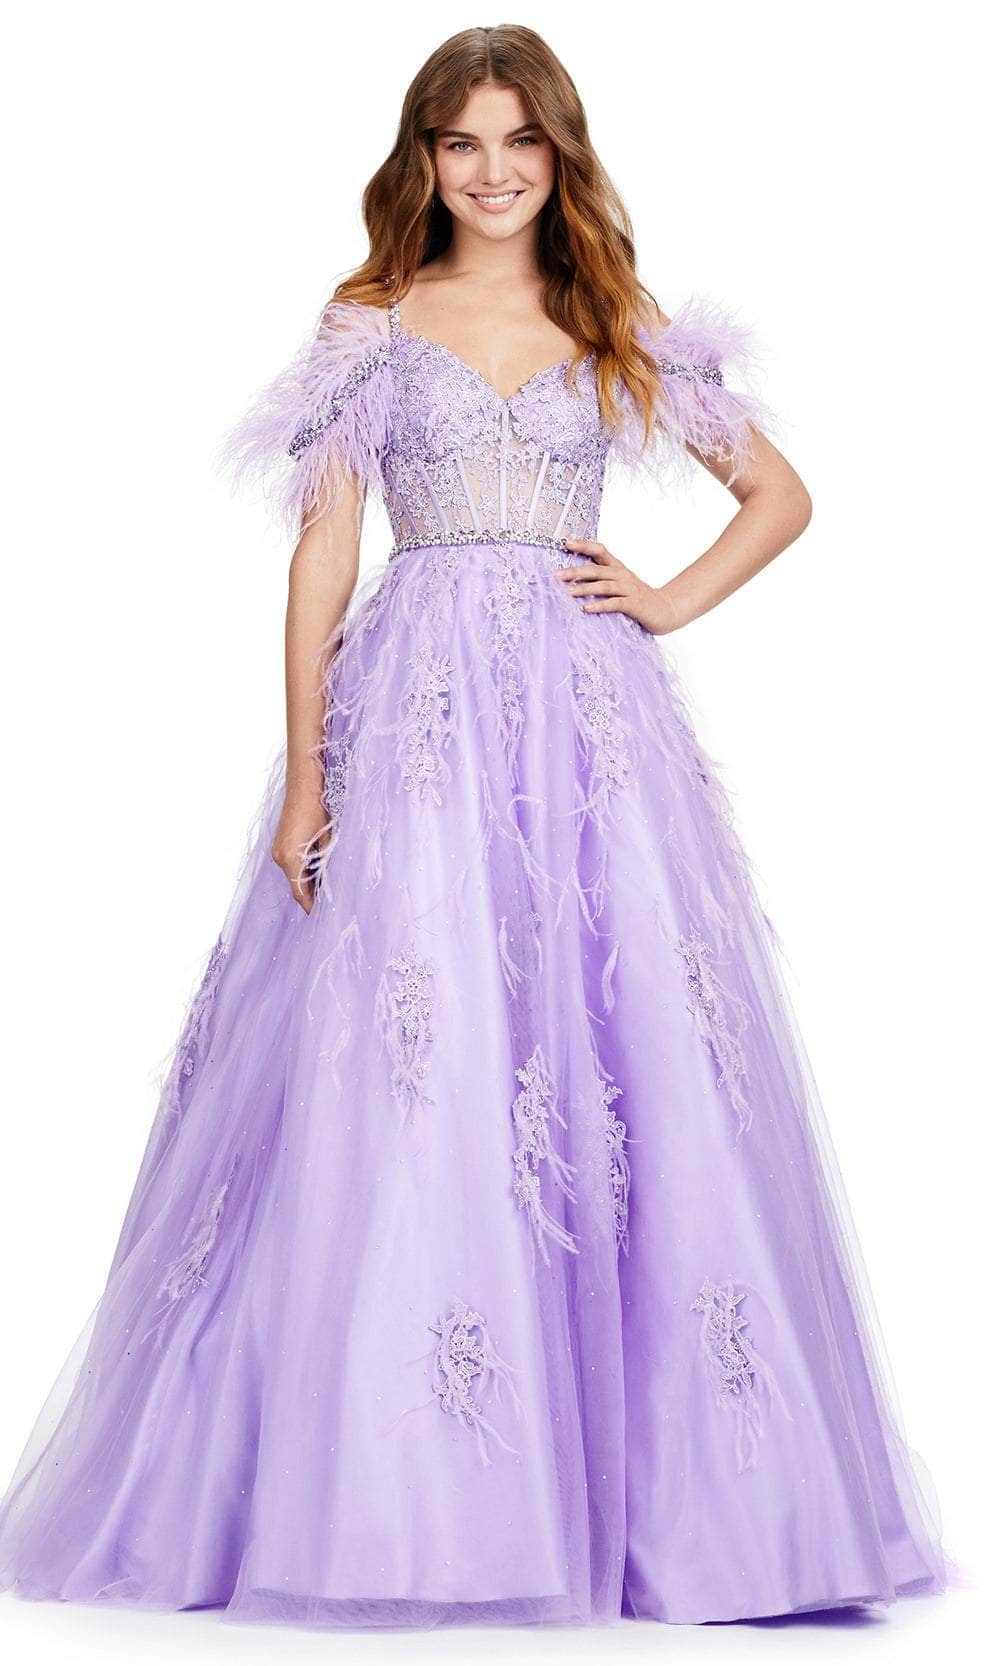 Image of Ashley Lauren 11447 - Feathered Cold Shoulder Evening Gown